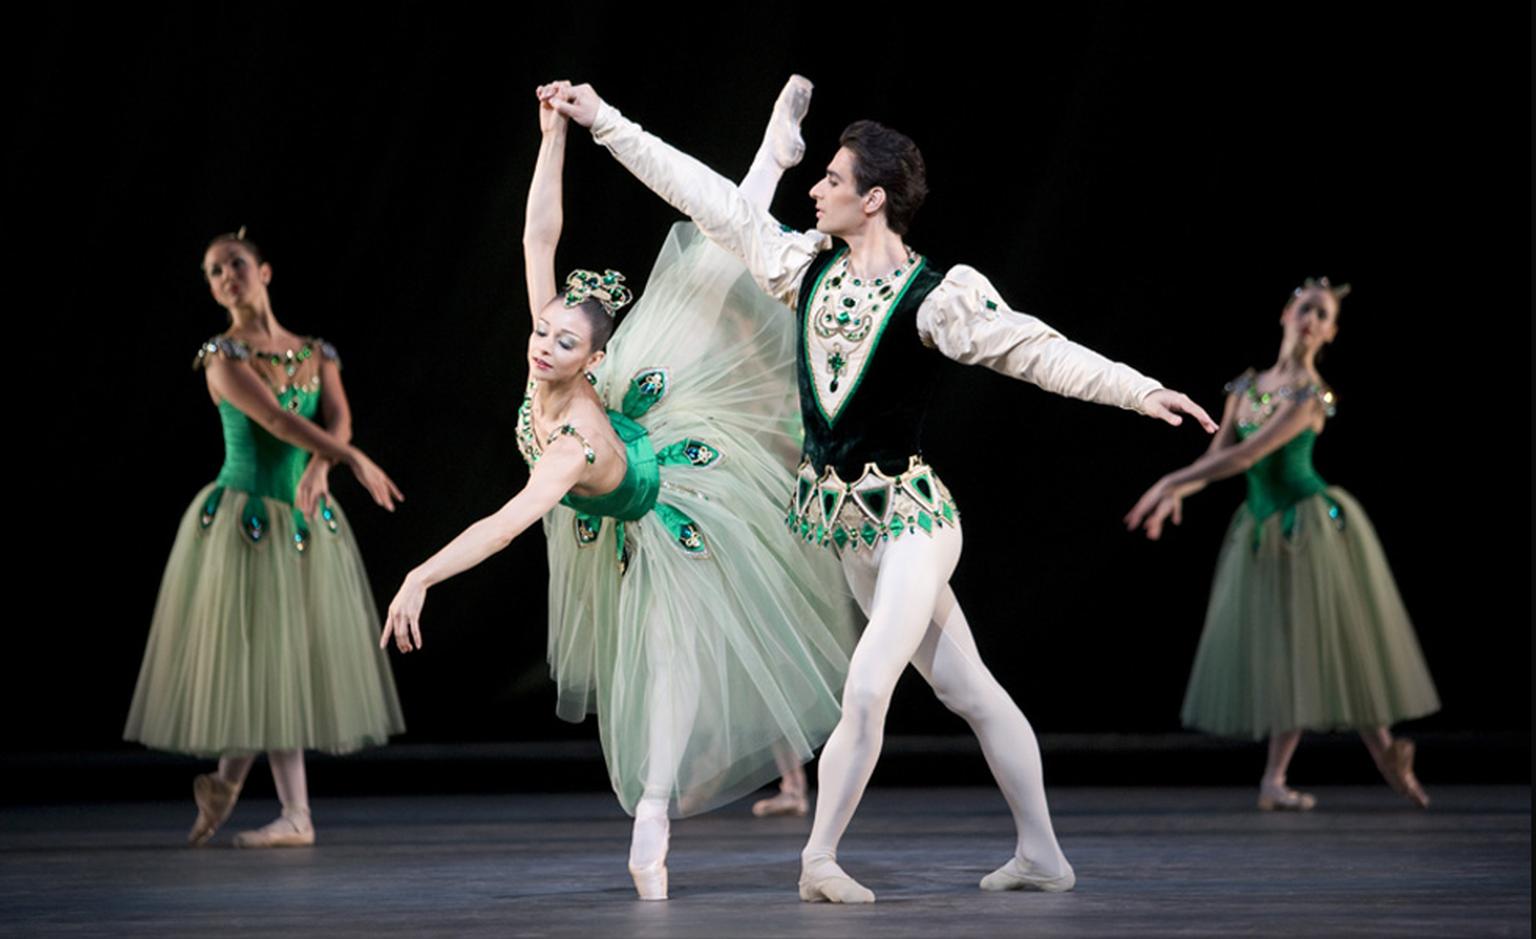 Roberta Marquez and Valeri Hristov in Emeralds as part of Jewels. Photo Johan Persson